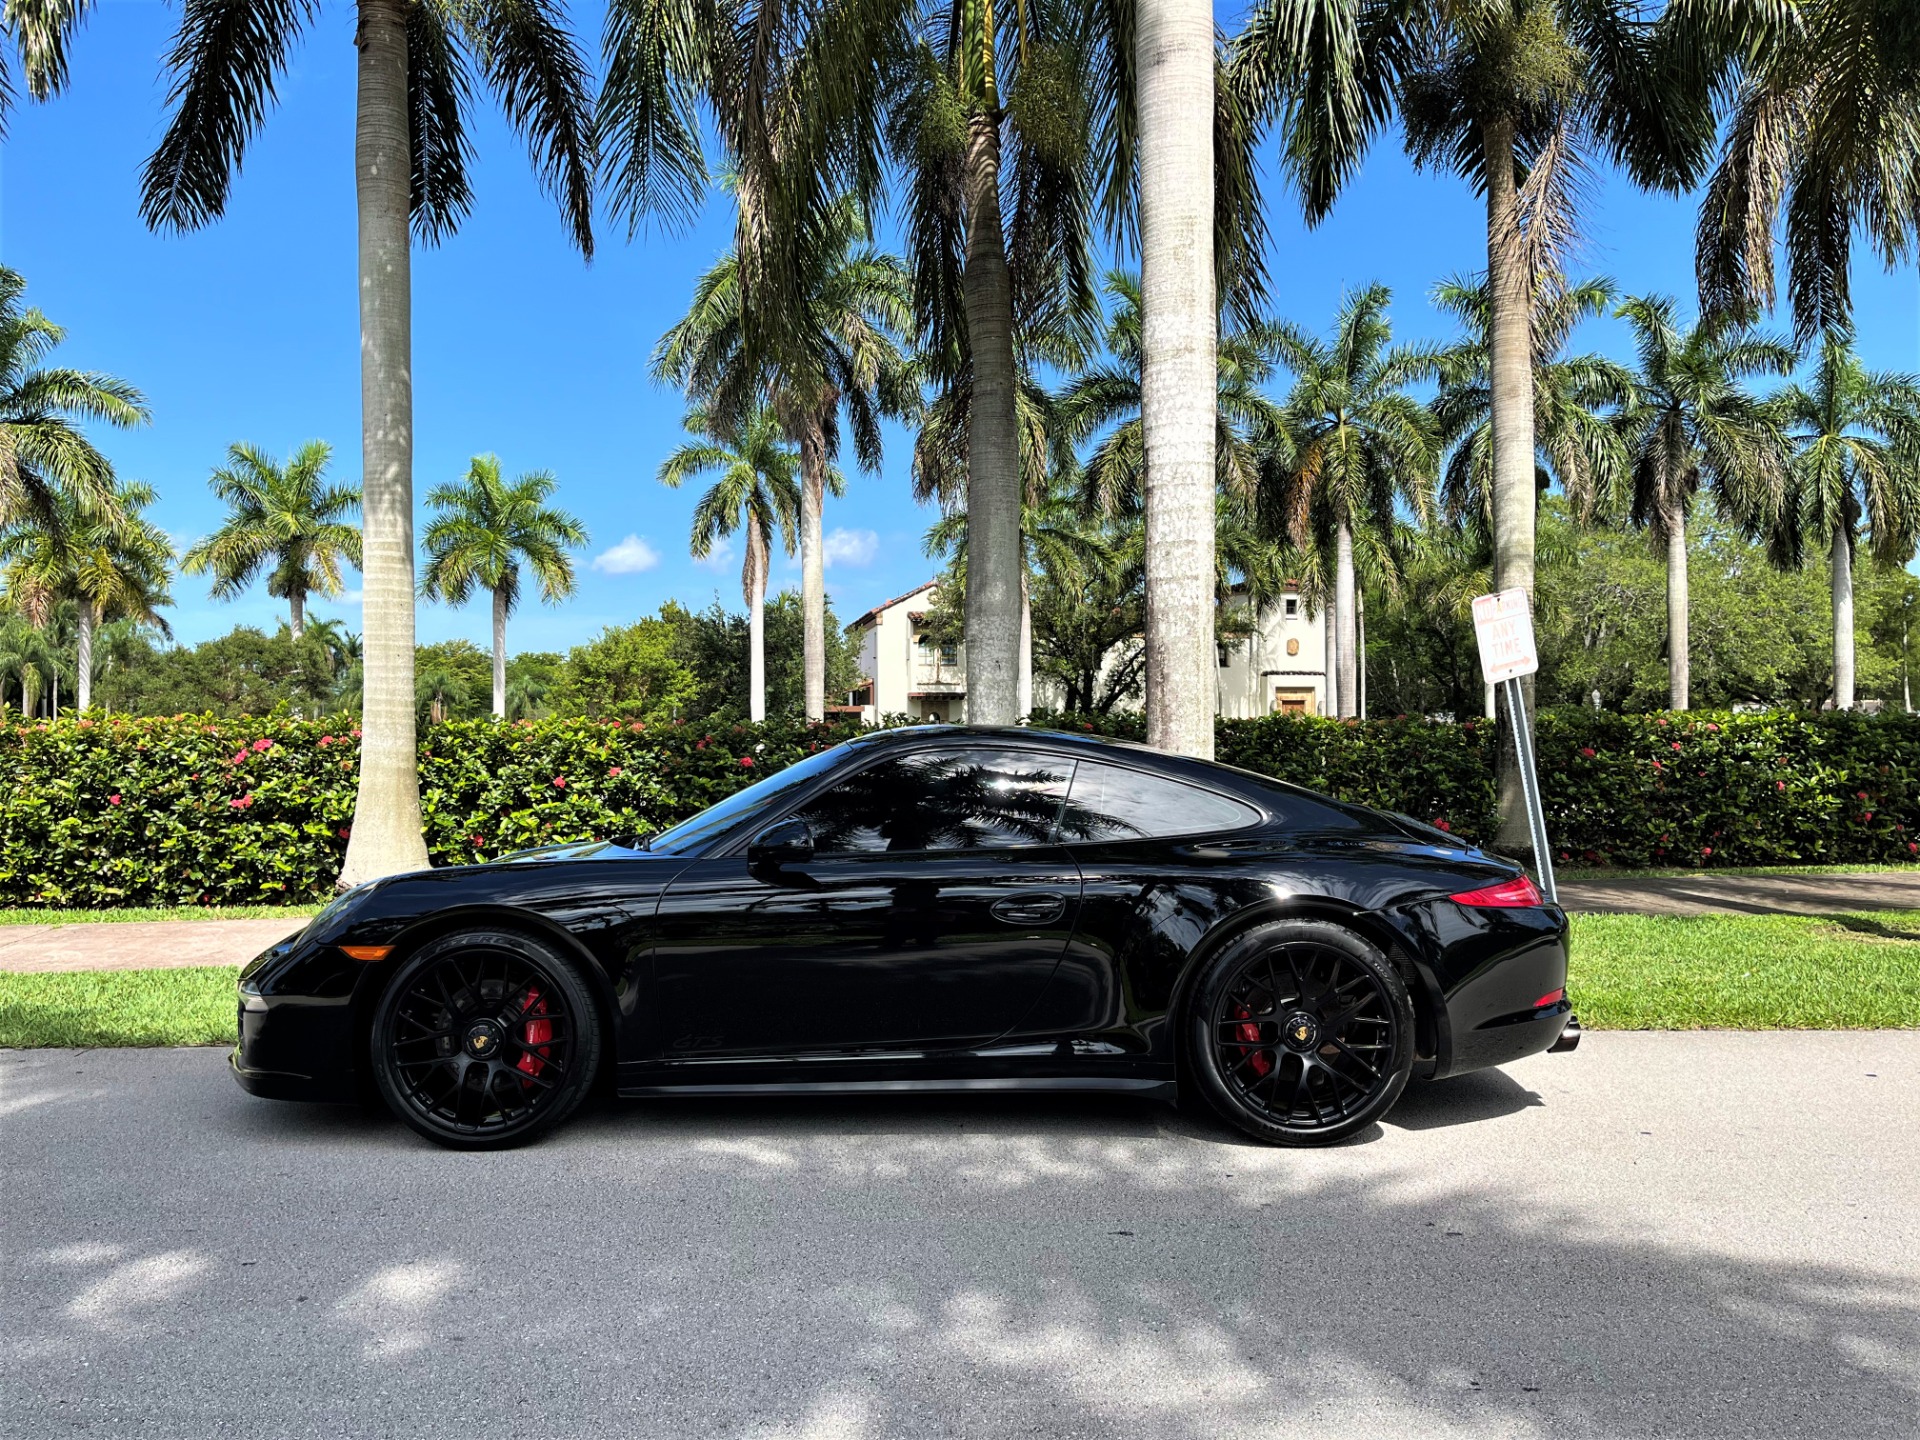 Used 2016 Porsche 911 Carrera 4 GTS for sale $119,850 at The Gables Sports Cars in Miami FL 33146 2